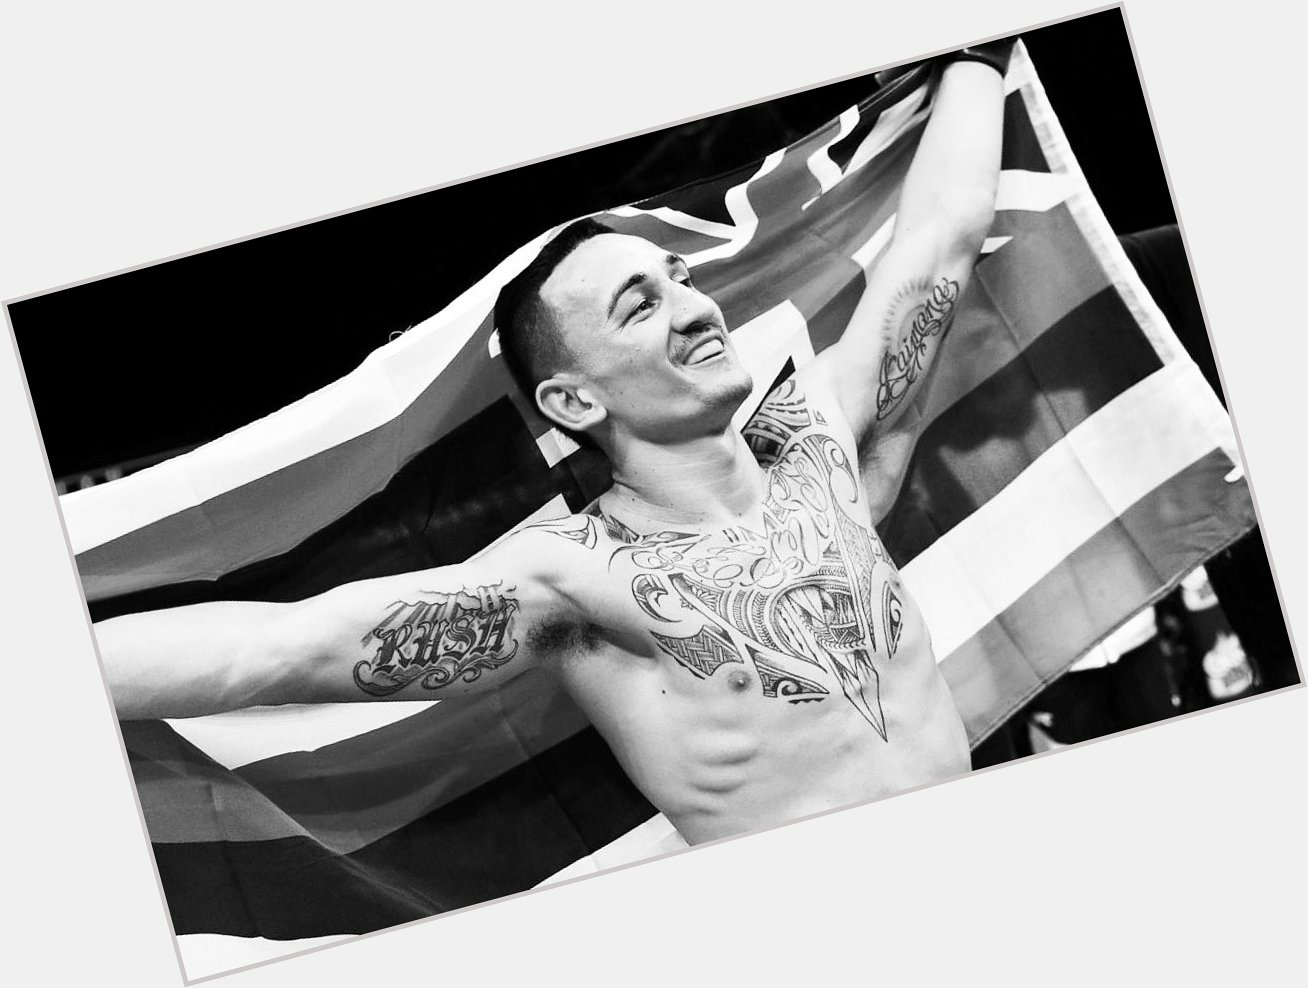 Happy birthday to the reigning and defending UFC Featherweight Champion.

Happy 26 birthday to Max Holloway. 